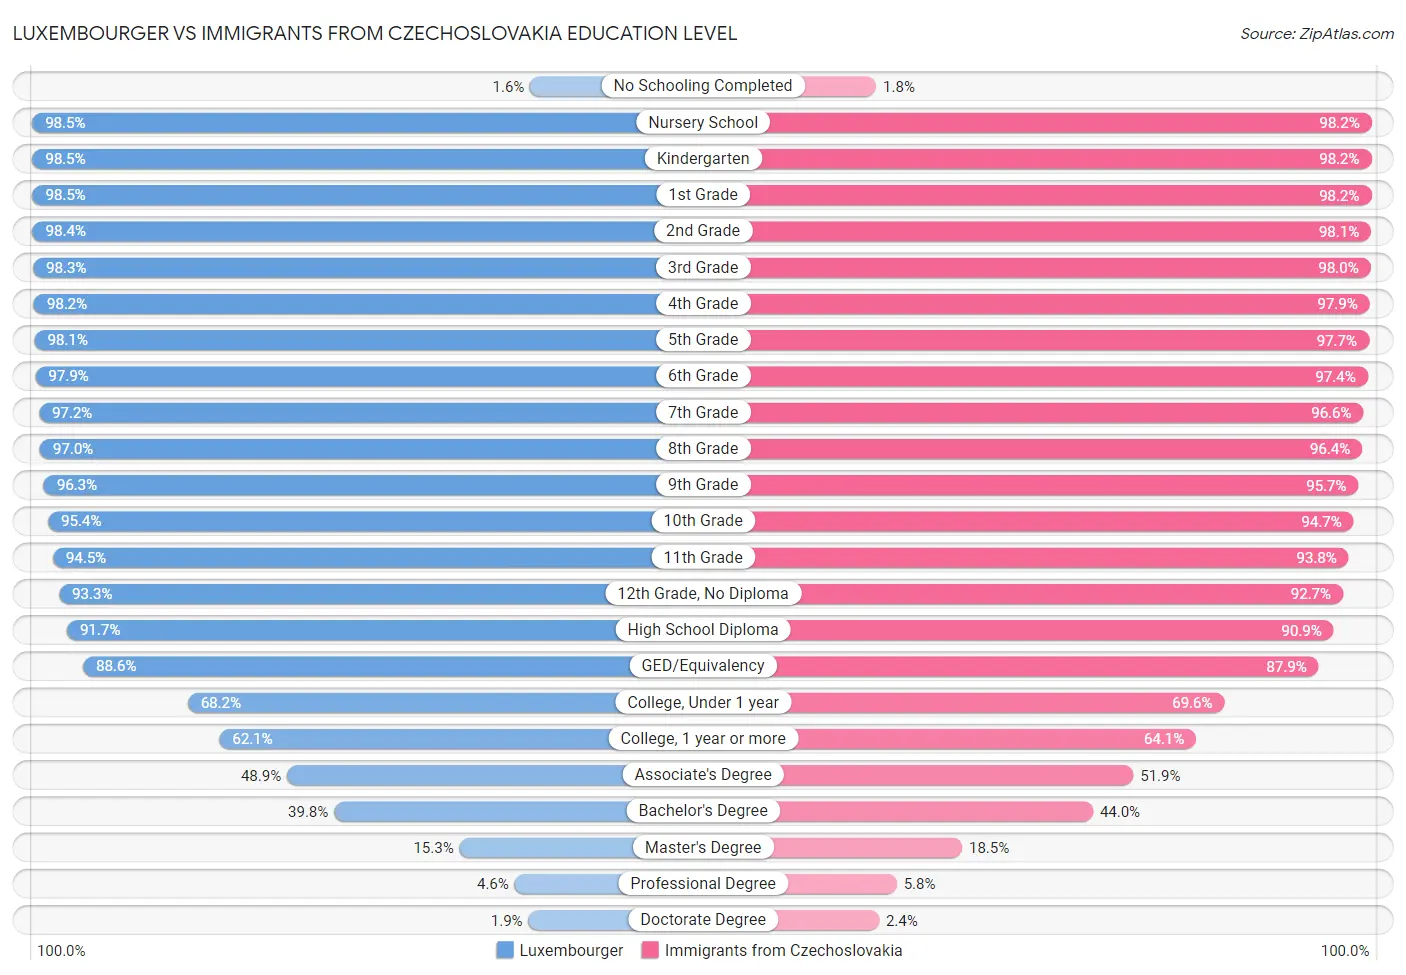 Luxembourger vs Immigrants from Czechoslovakia Education Level